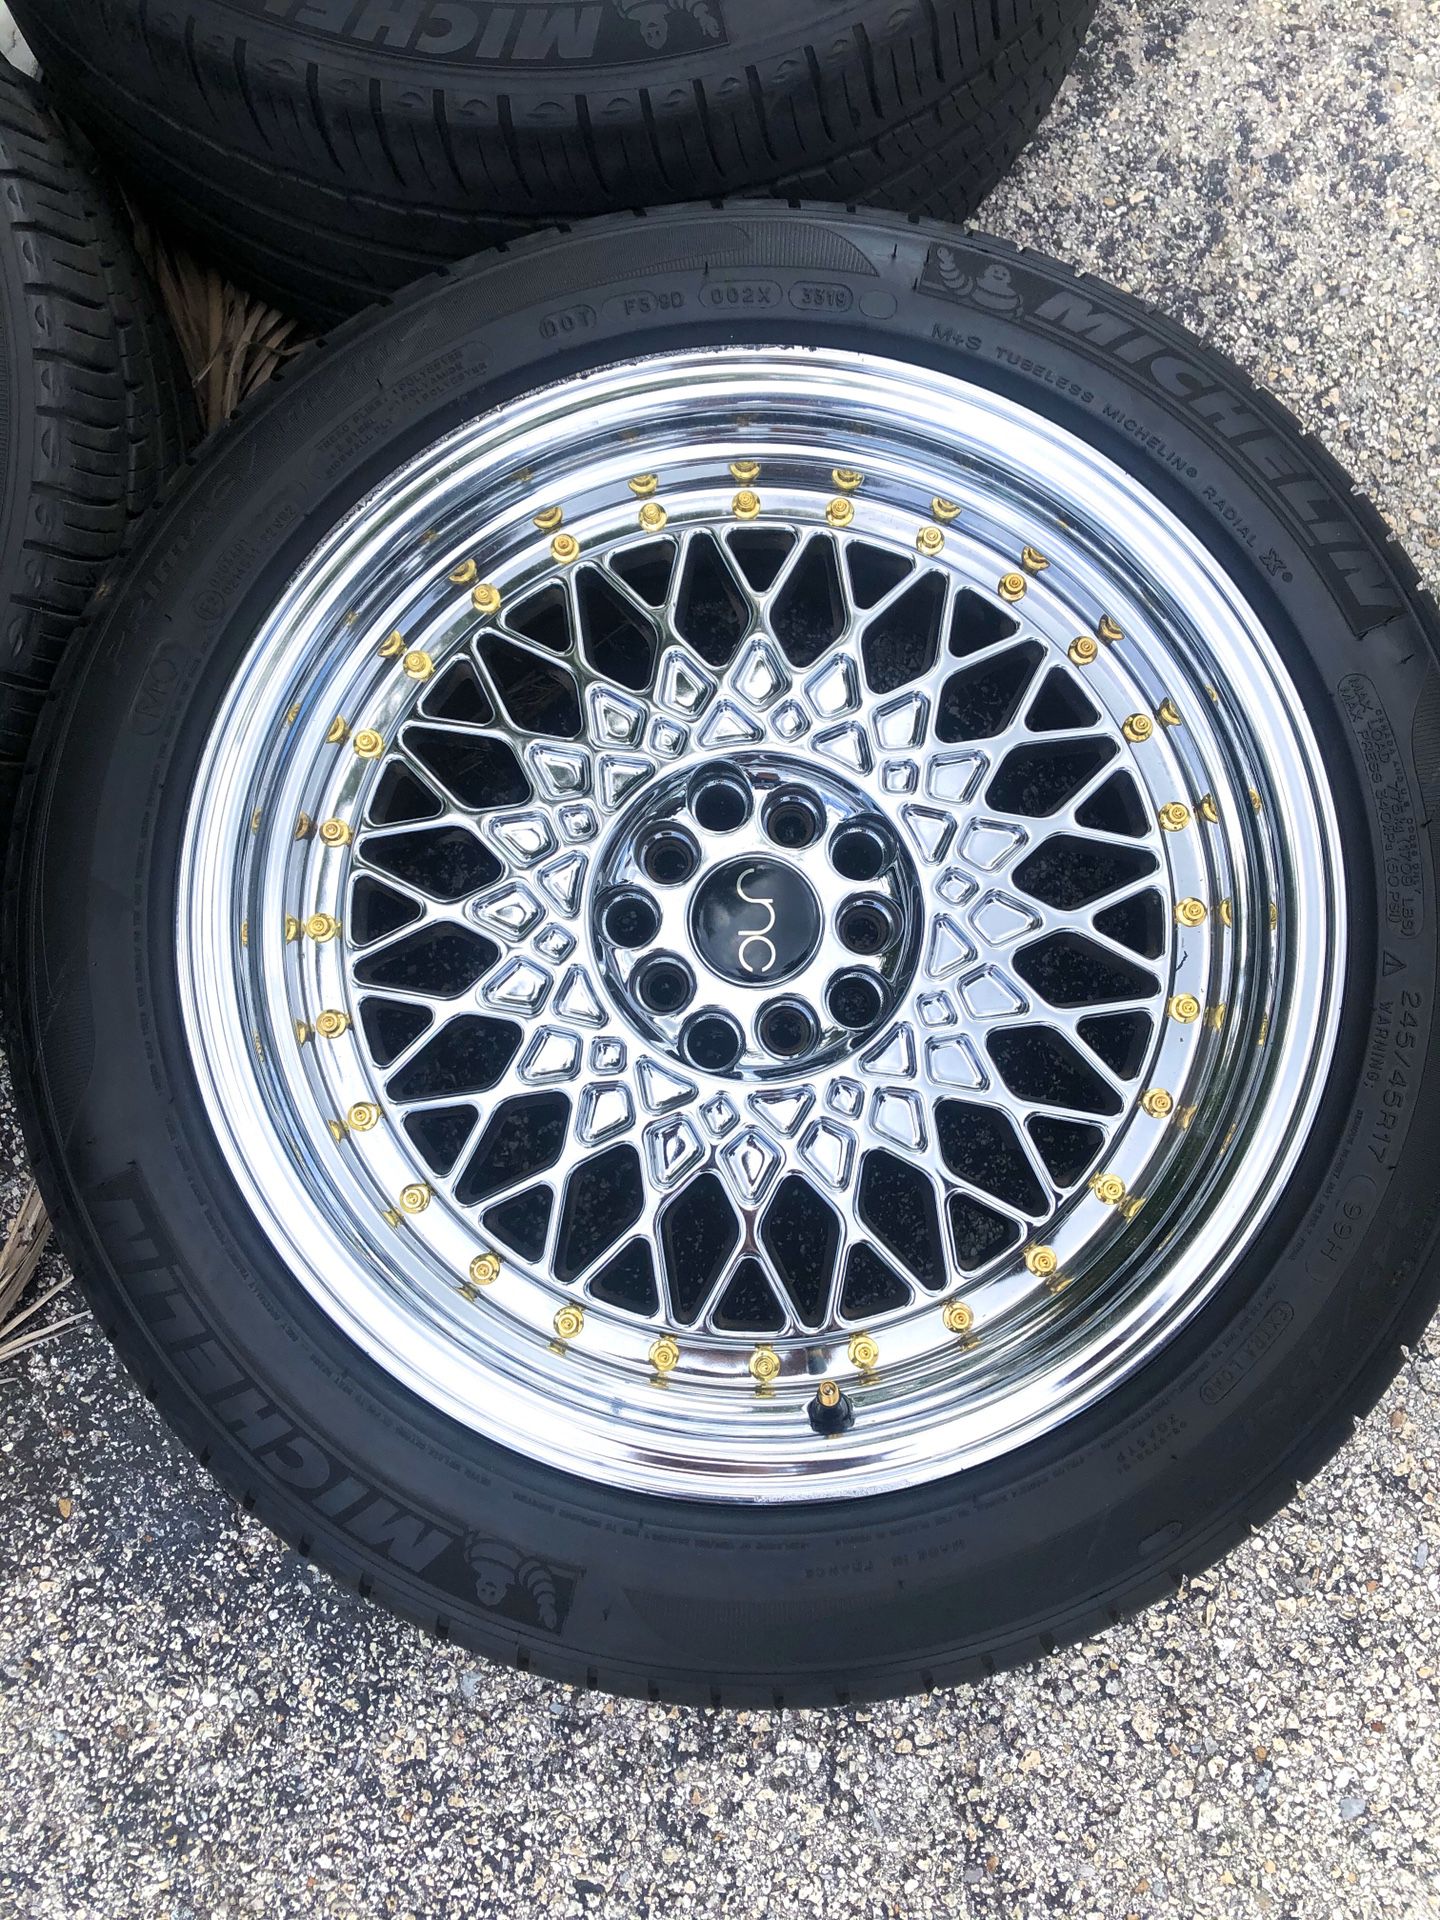 Jnc Chrome rims🔥 17” (Just Rims no Tires) SERIOUS BUYERS ONLY DONT WASTE MY TIME